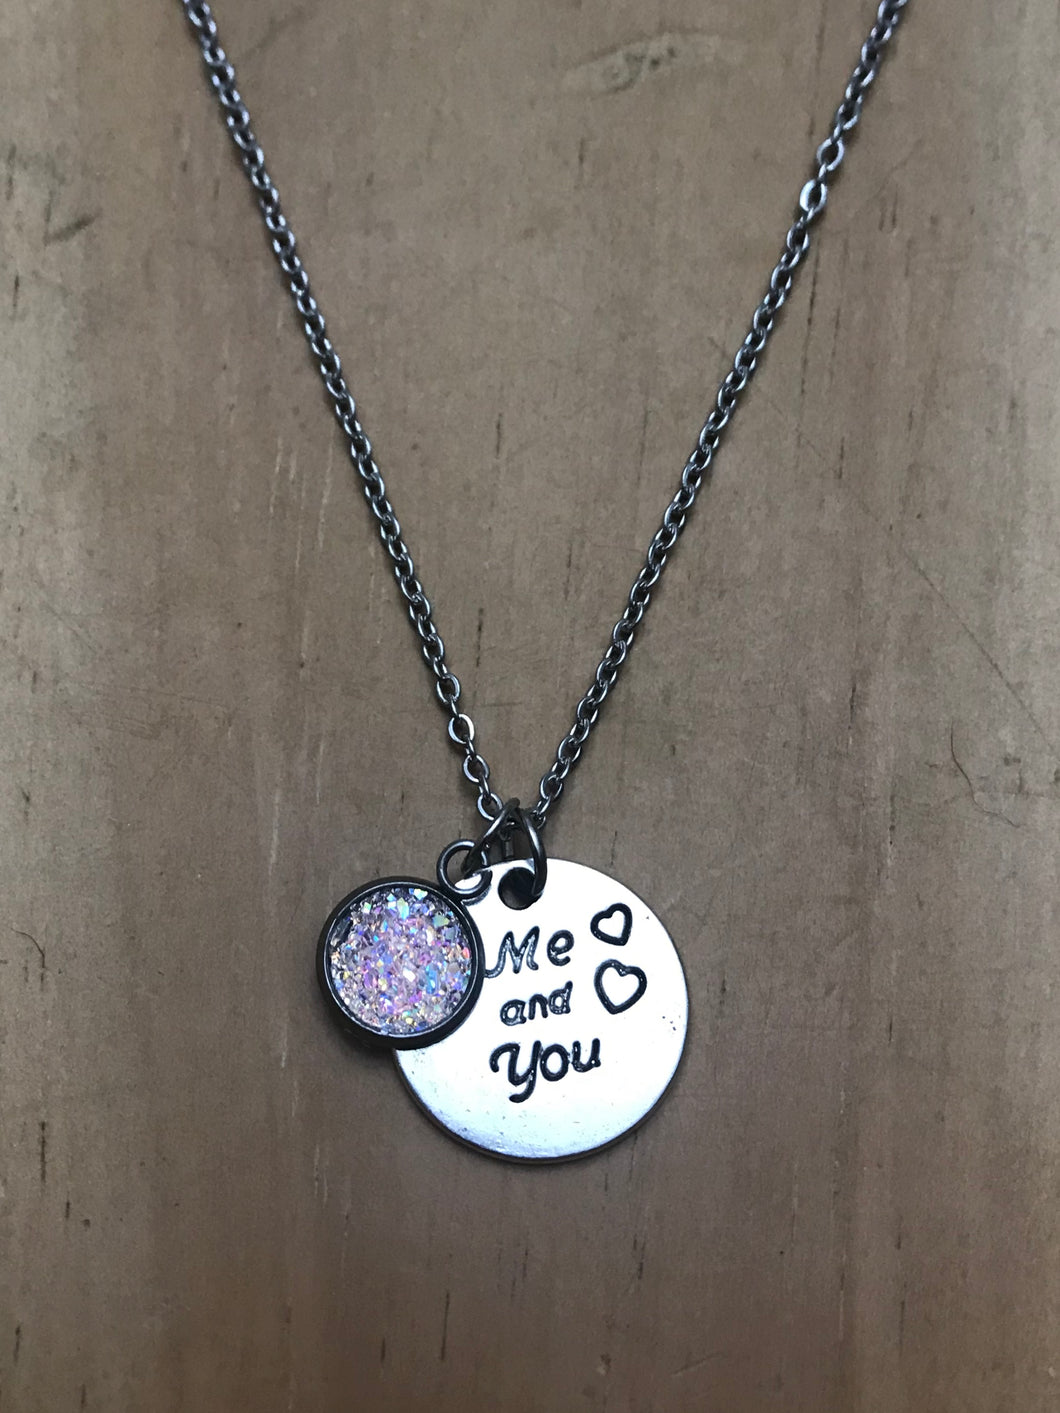 “Me and You 💕” Necklace (Stainless Steel)